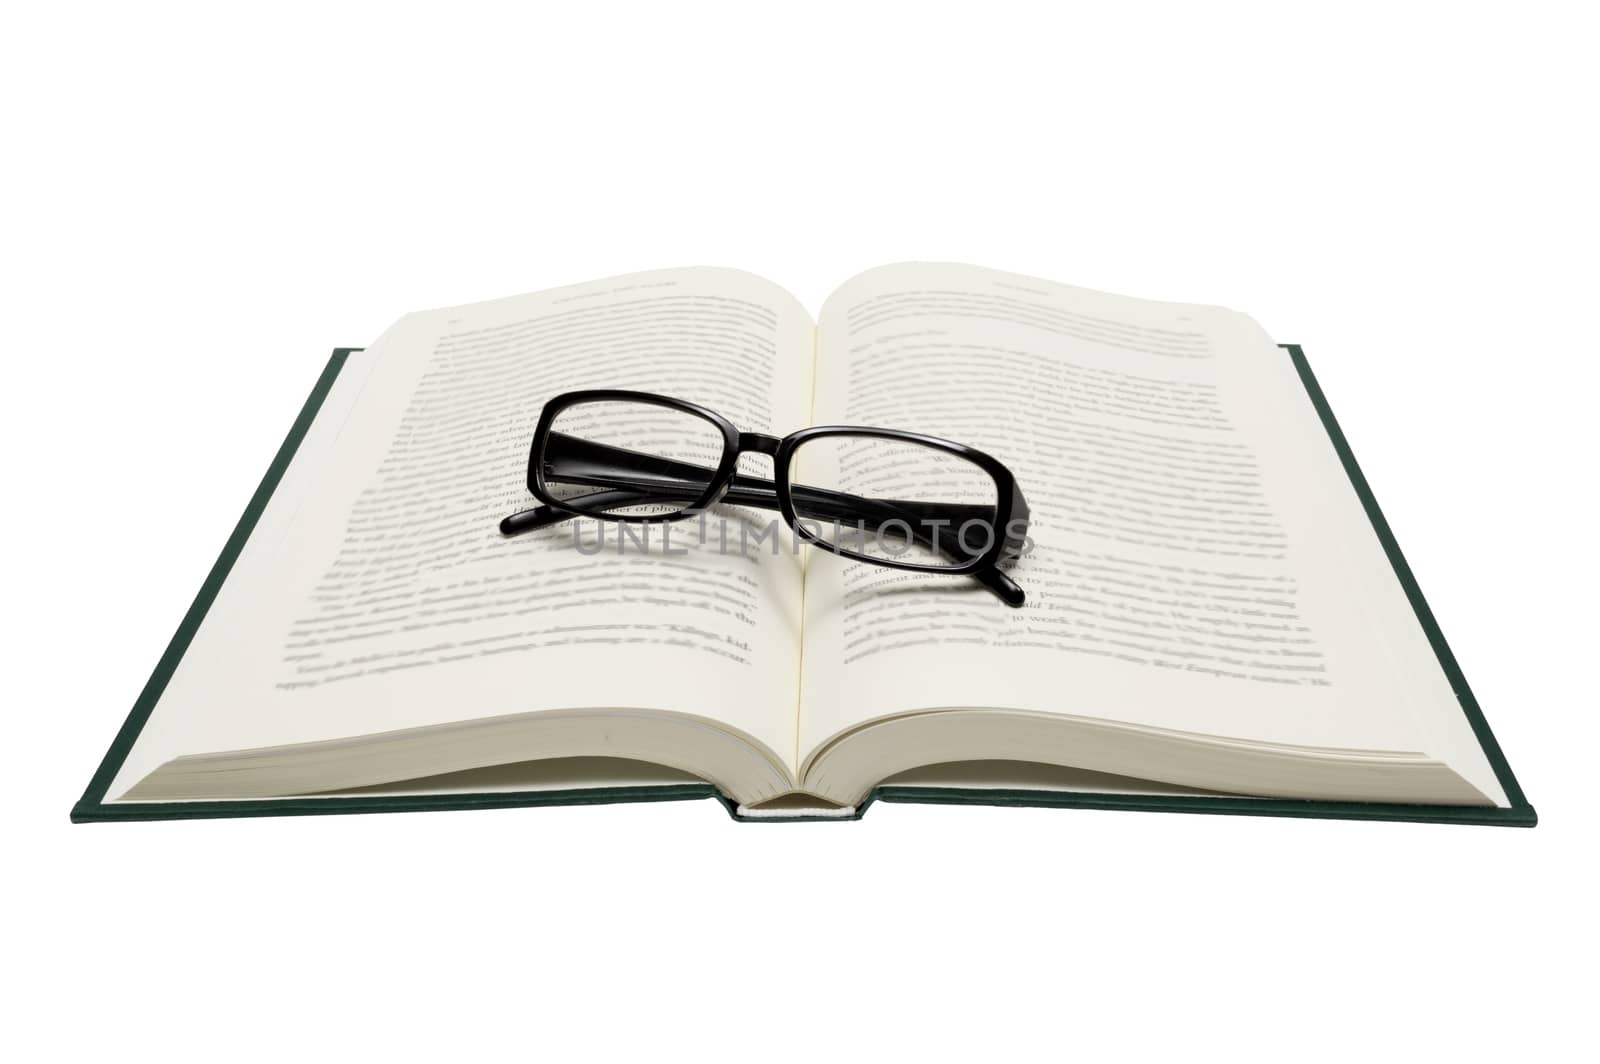 Folded Glasses On Opened Book by stockbuster1